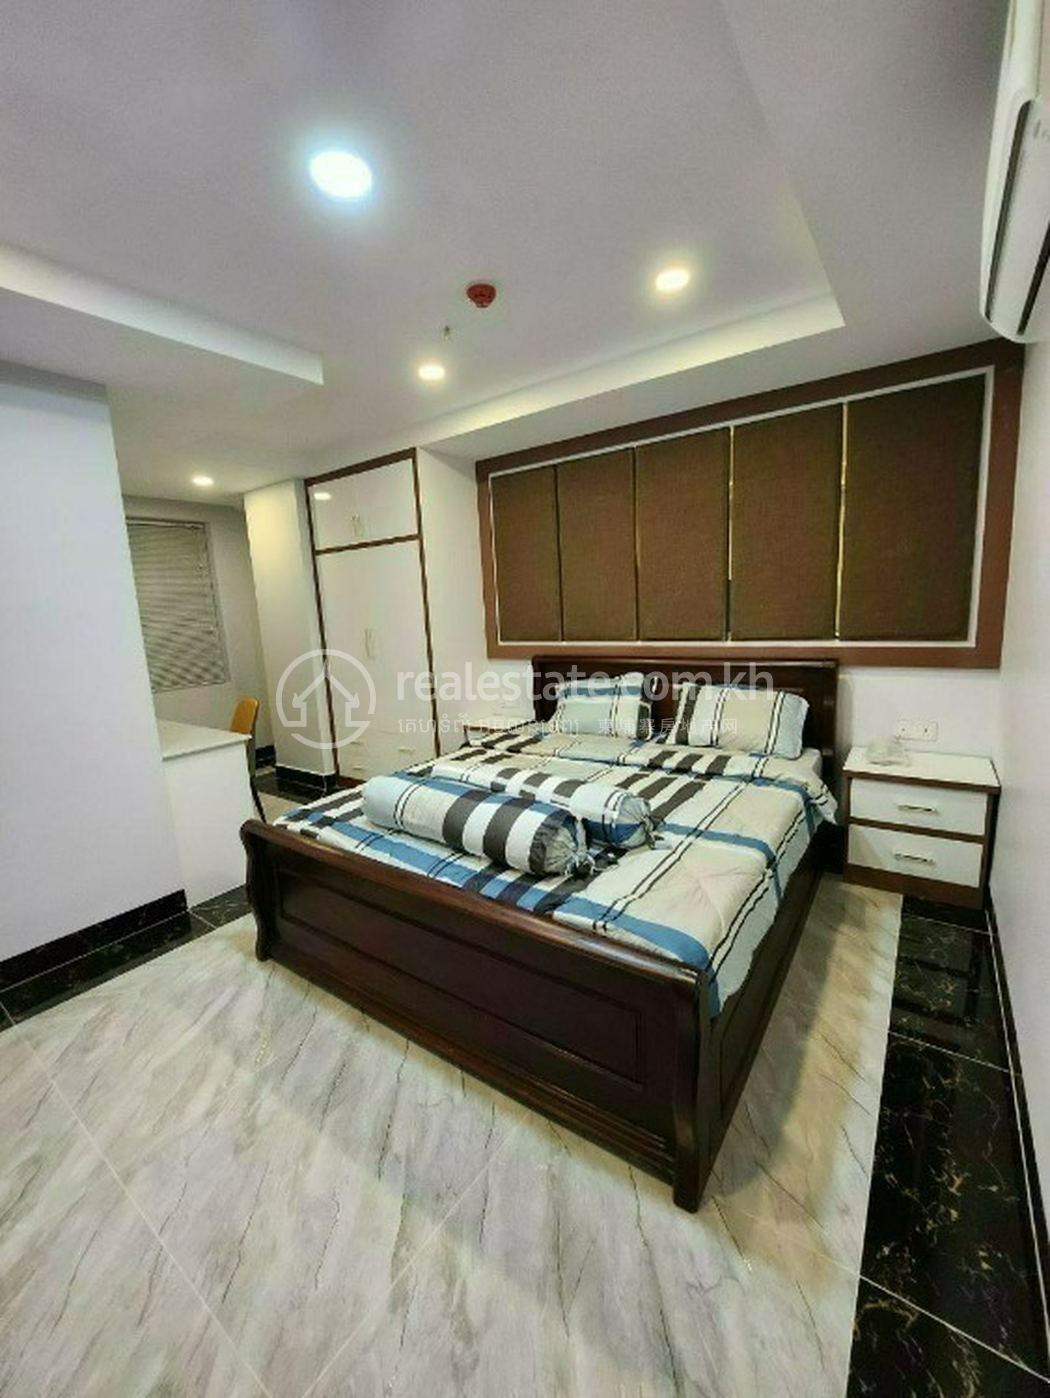 The ps residenct 1bed0.jpg